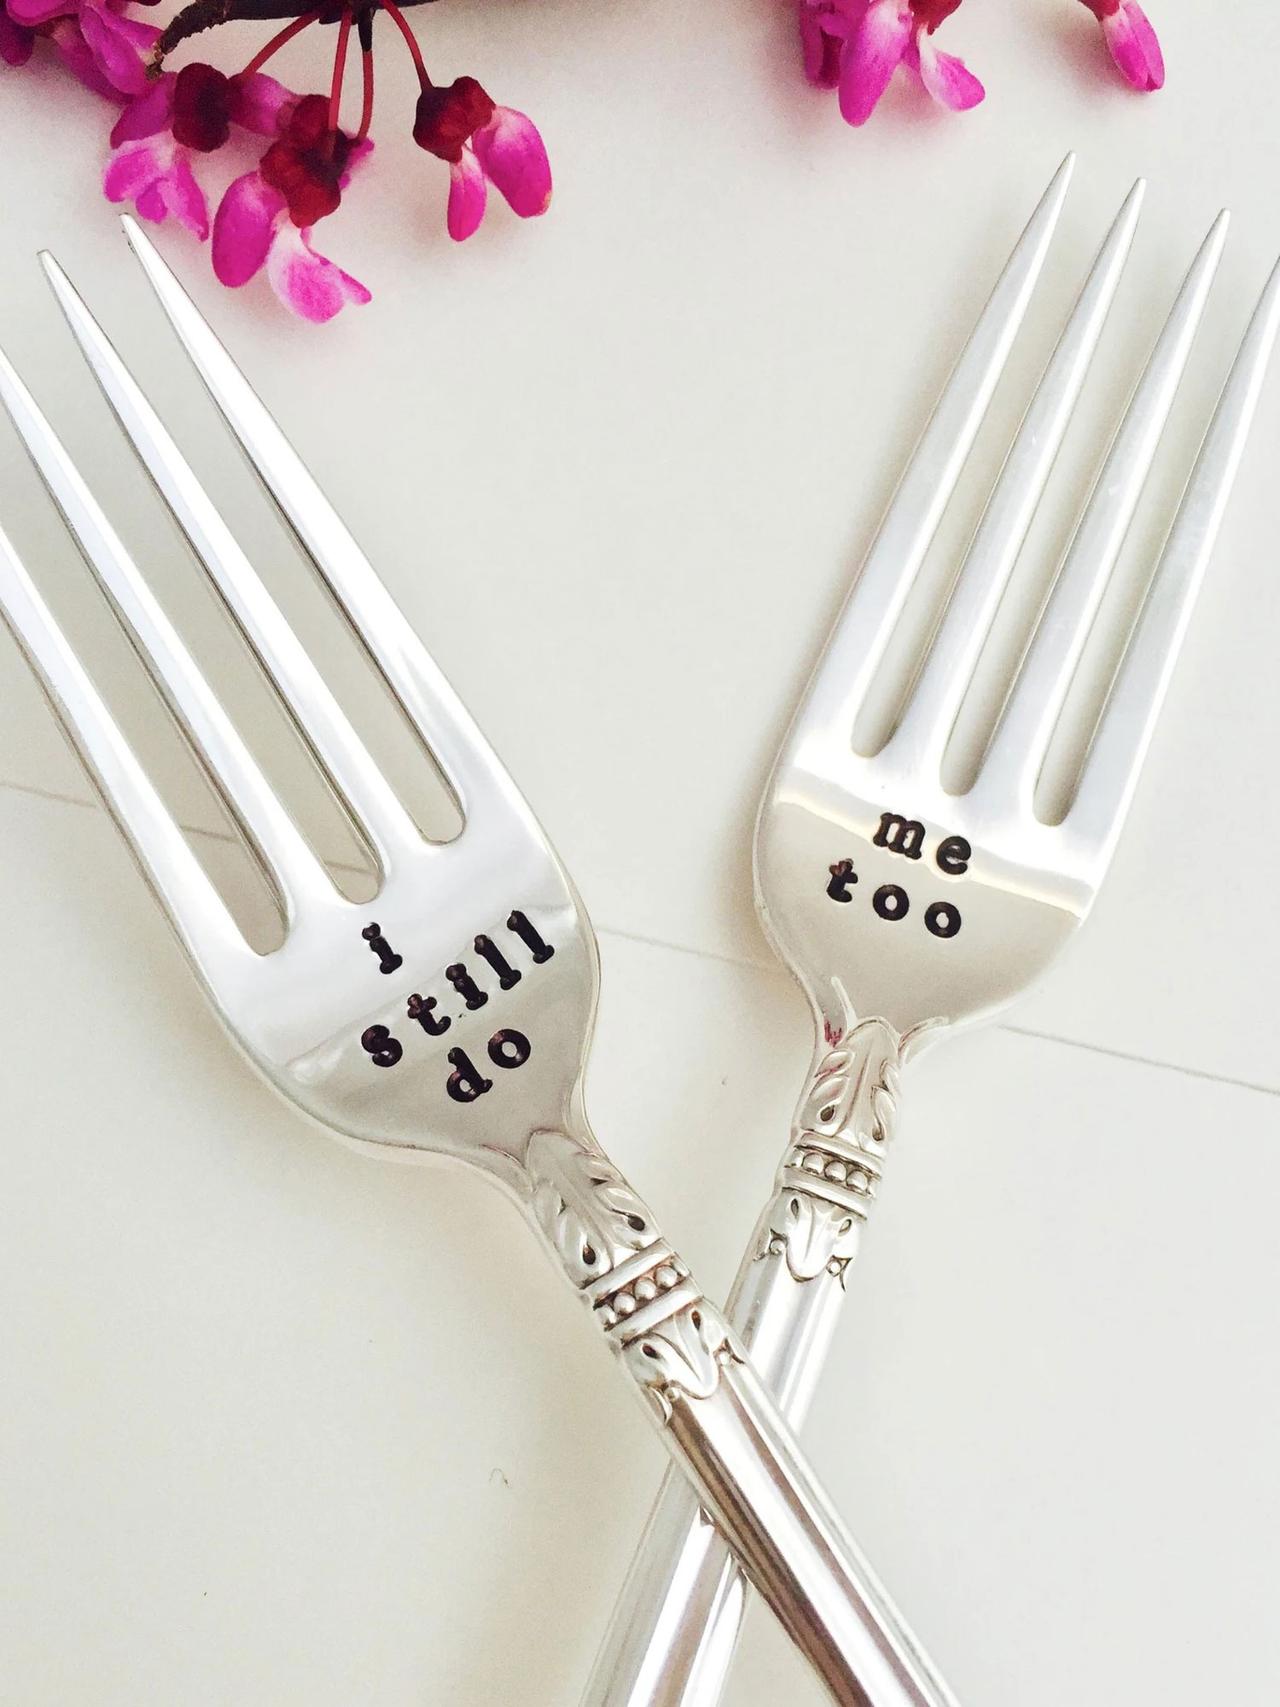 I Still Do and Me Too stamped forks silverware fifth anniversary gift